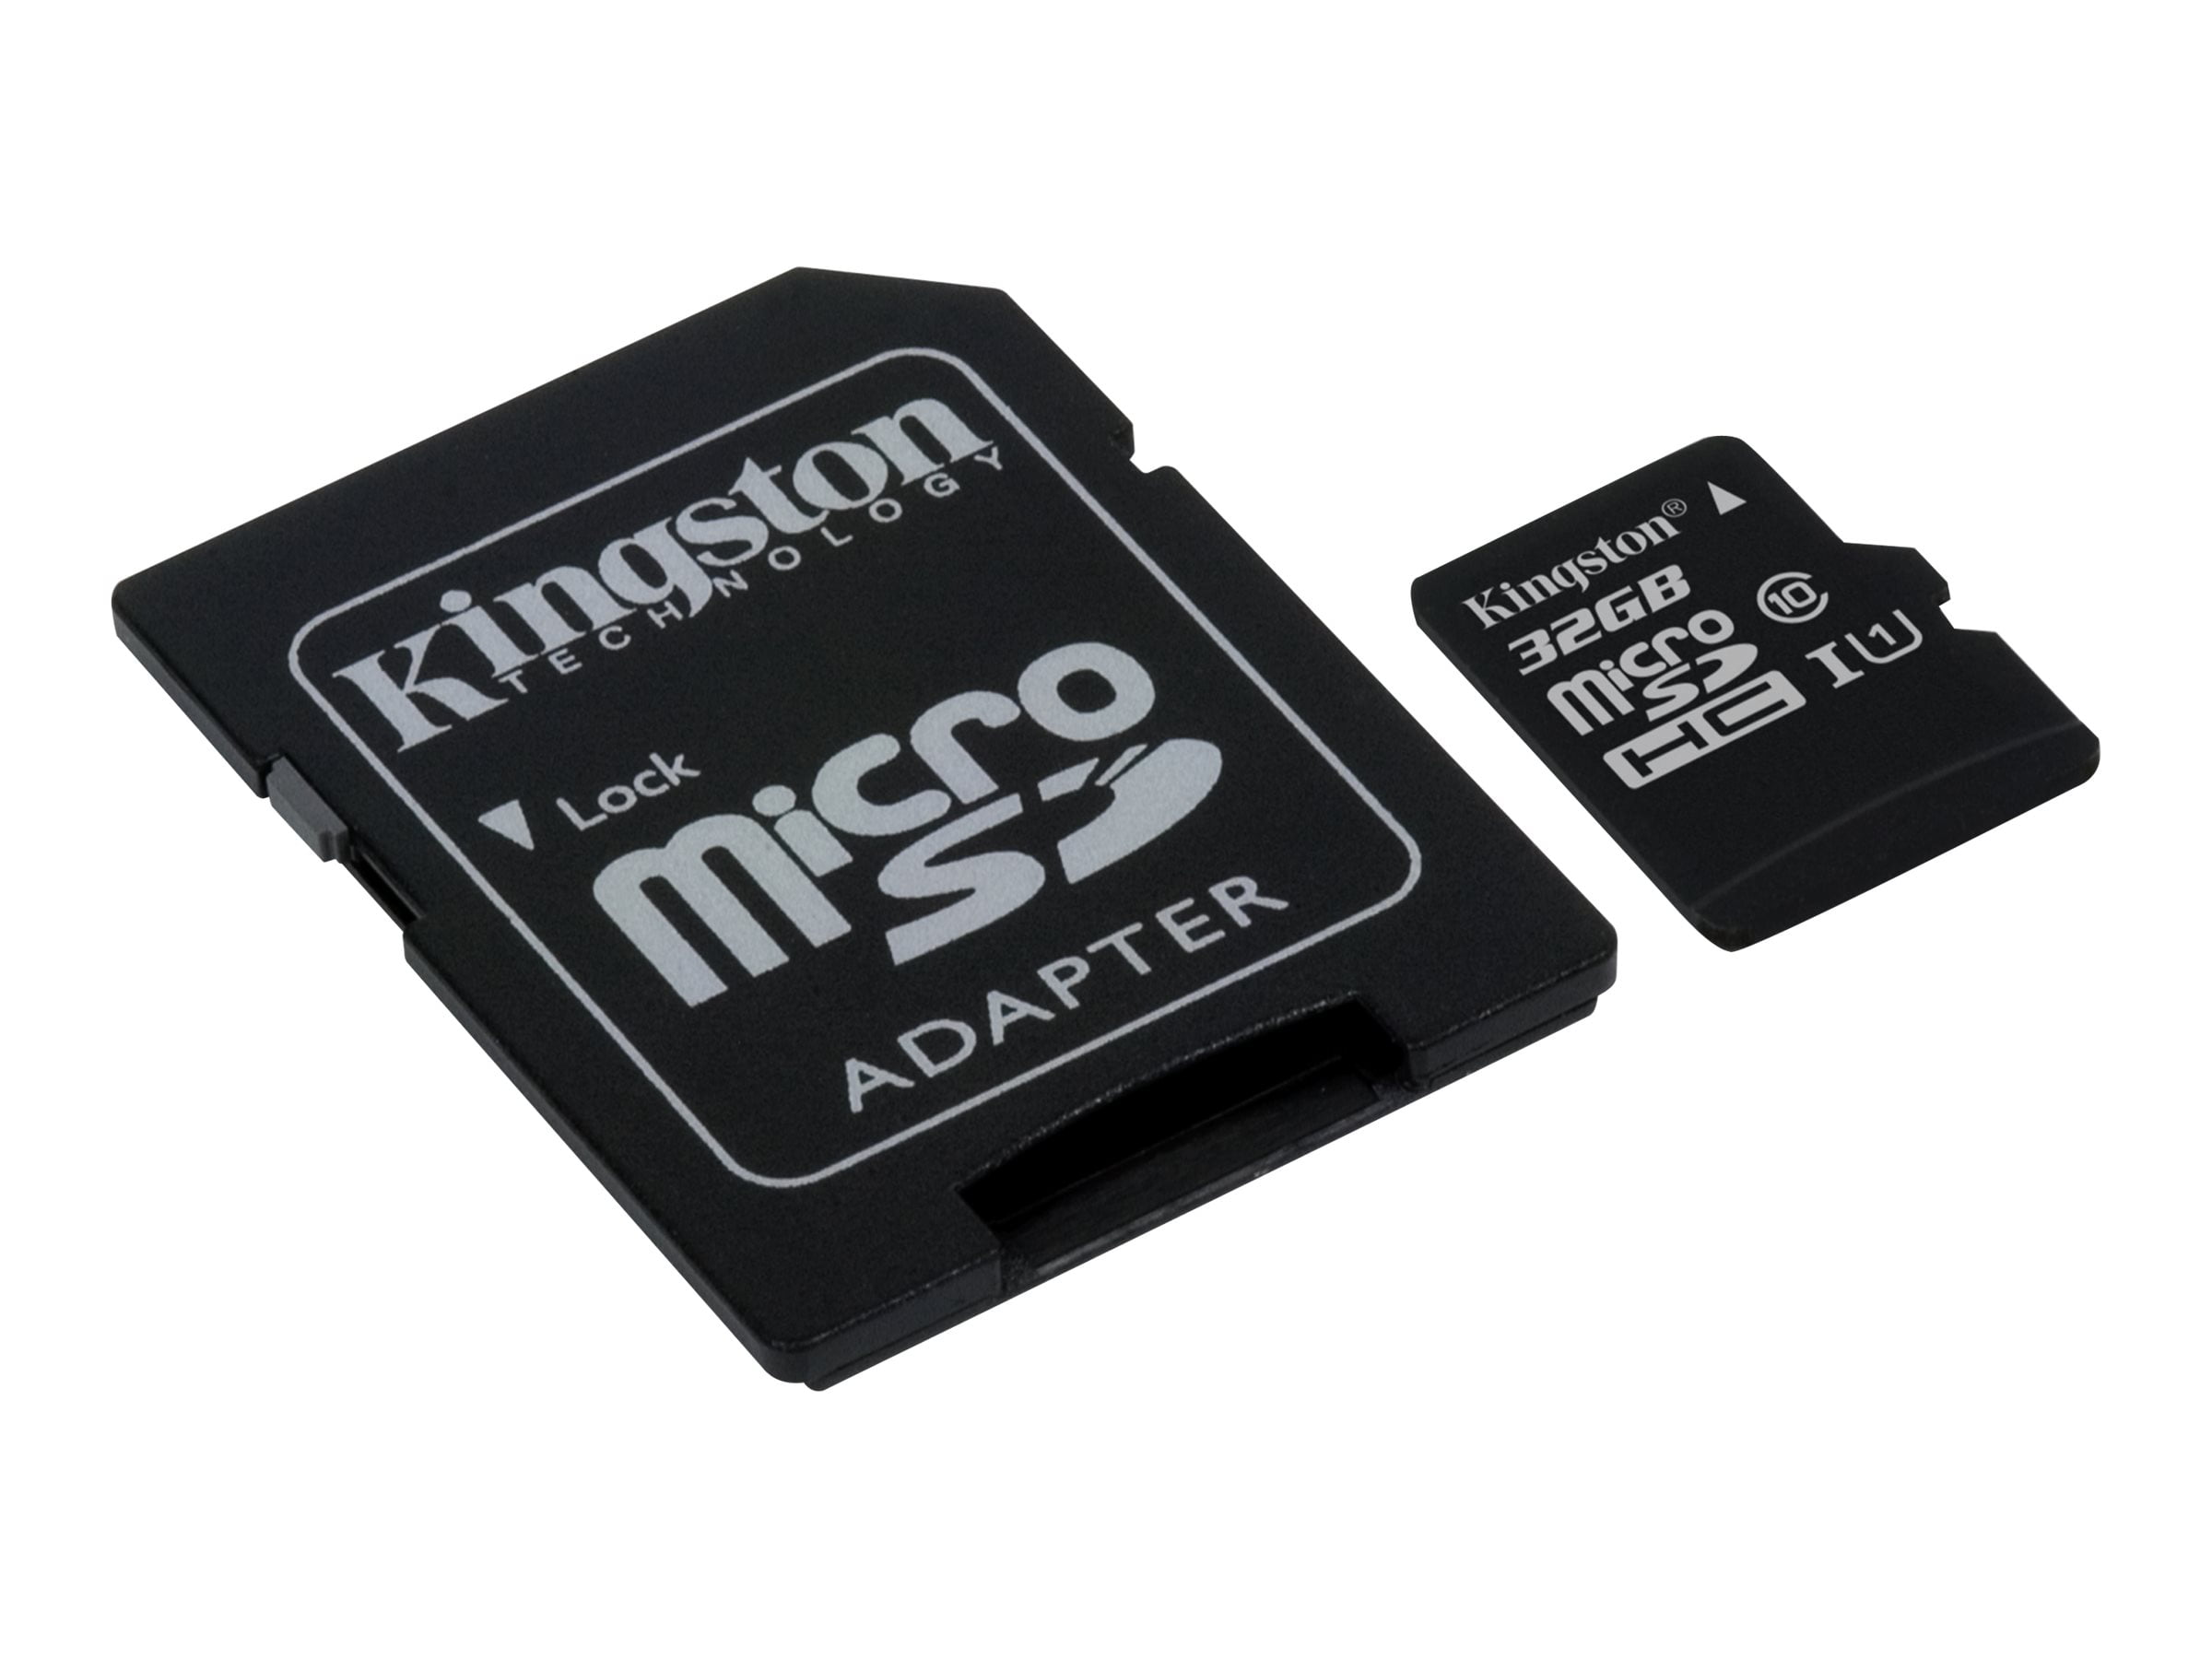 Kingston 512GB Sony E5303 MicroSDXC Canvas Select Plus Card Verified by SanFlash. 100MBs Works with Kingston 